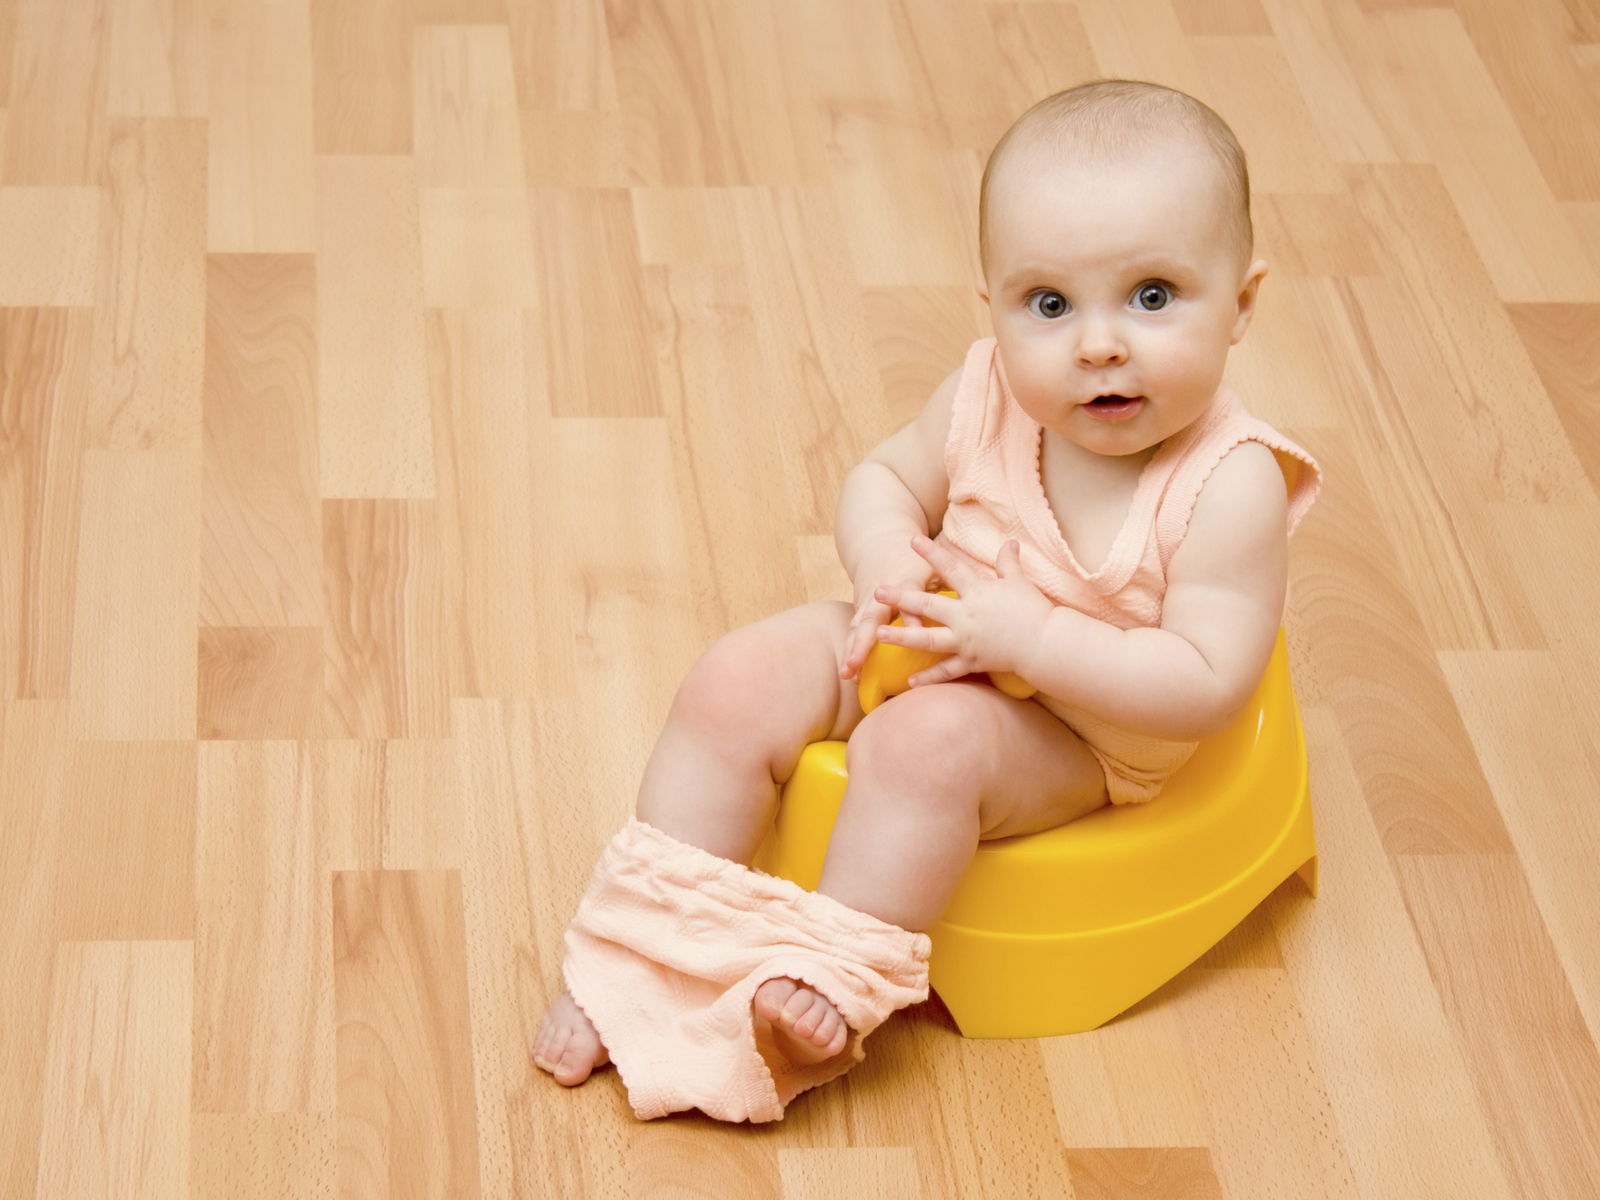 baby poop 101: what's normal and what's not - baby care journals